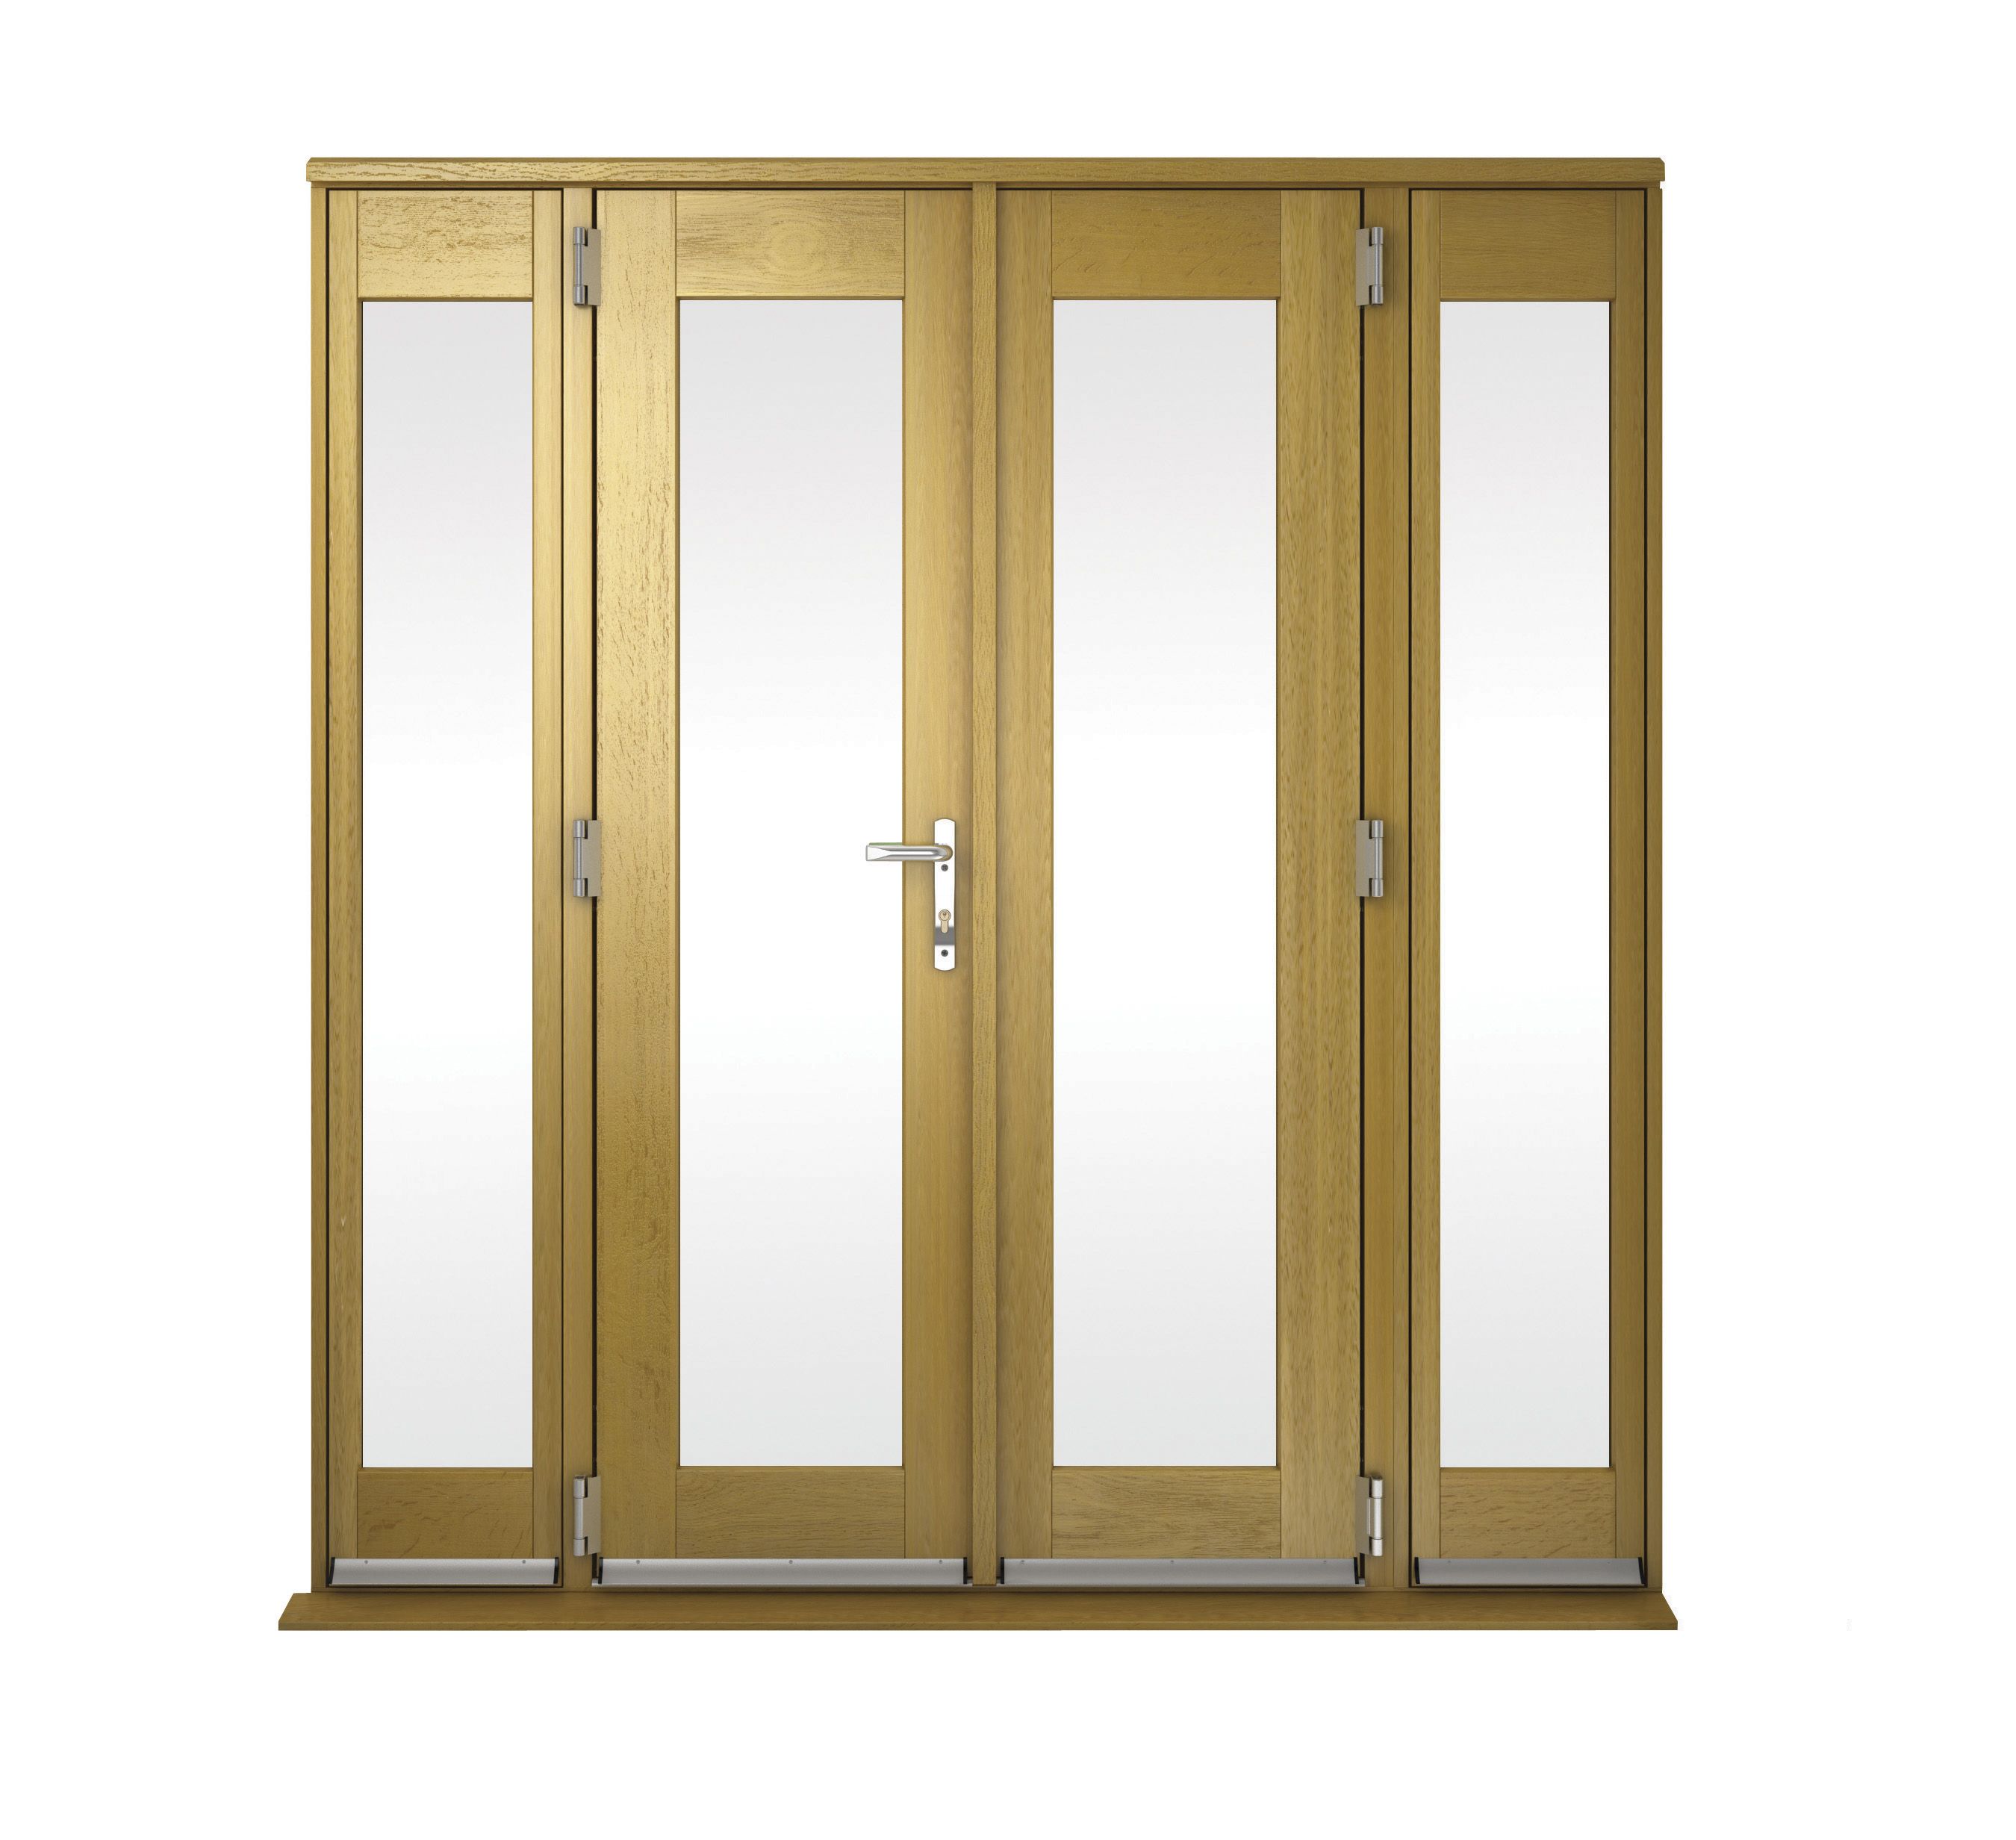 Image of Wickes Albery Pattern 10 Solid Oak Laminate French Doors 8ft with 2 Side Lites 300mm